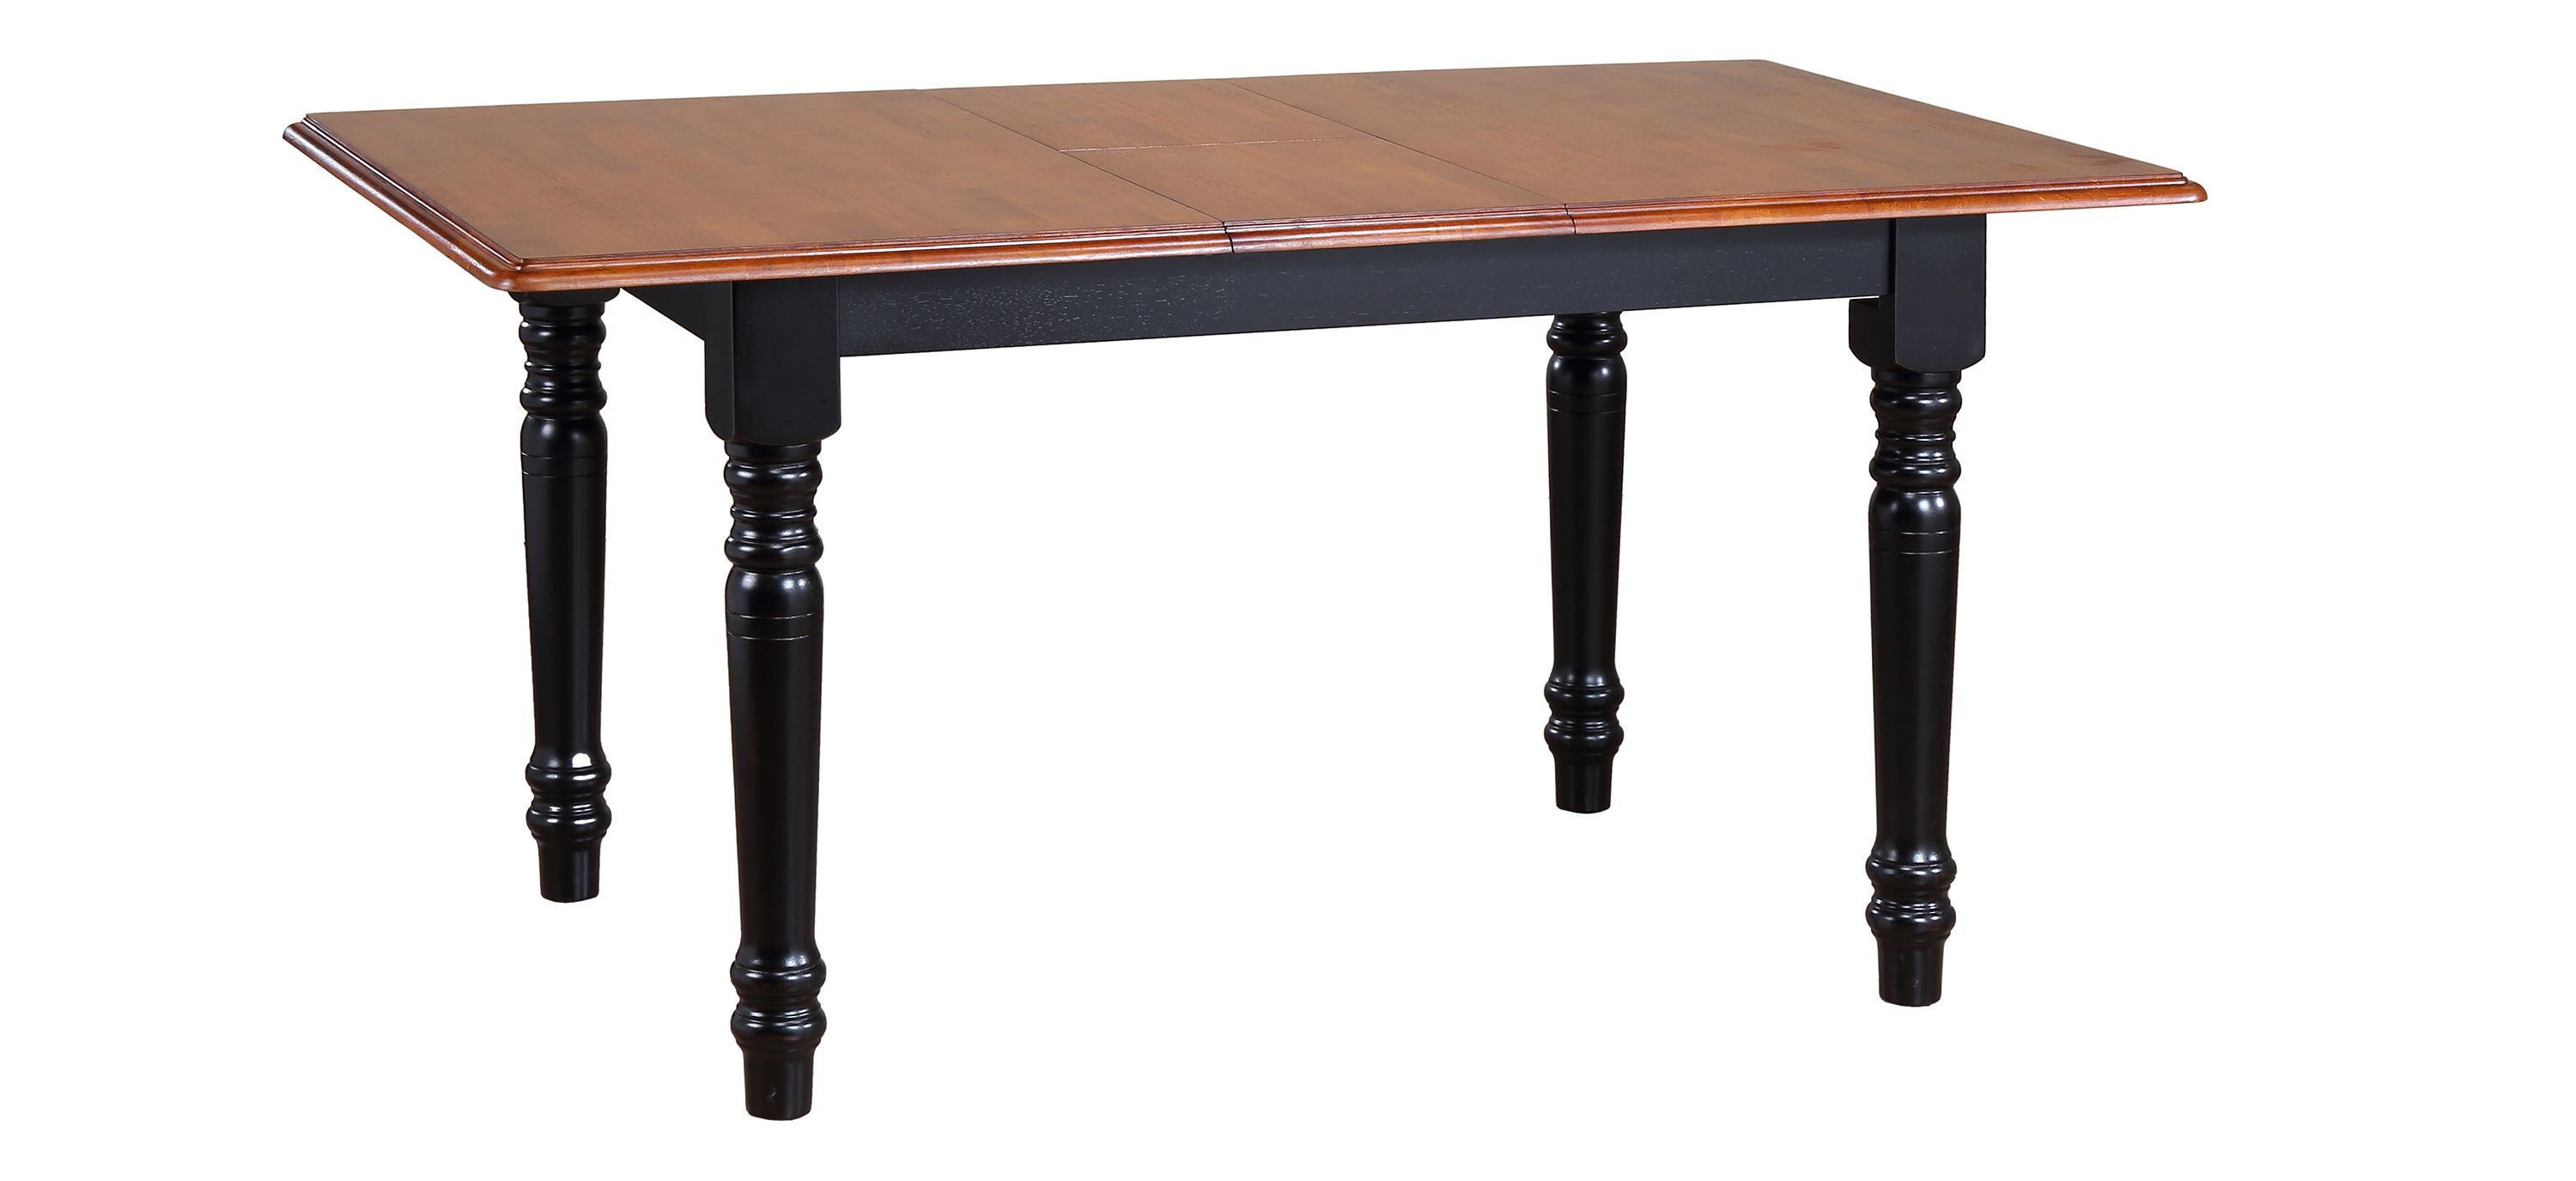 Black Cherry Selections Butterfly Leaf Dining Table